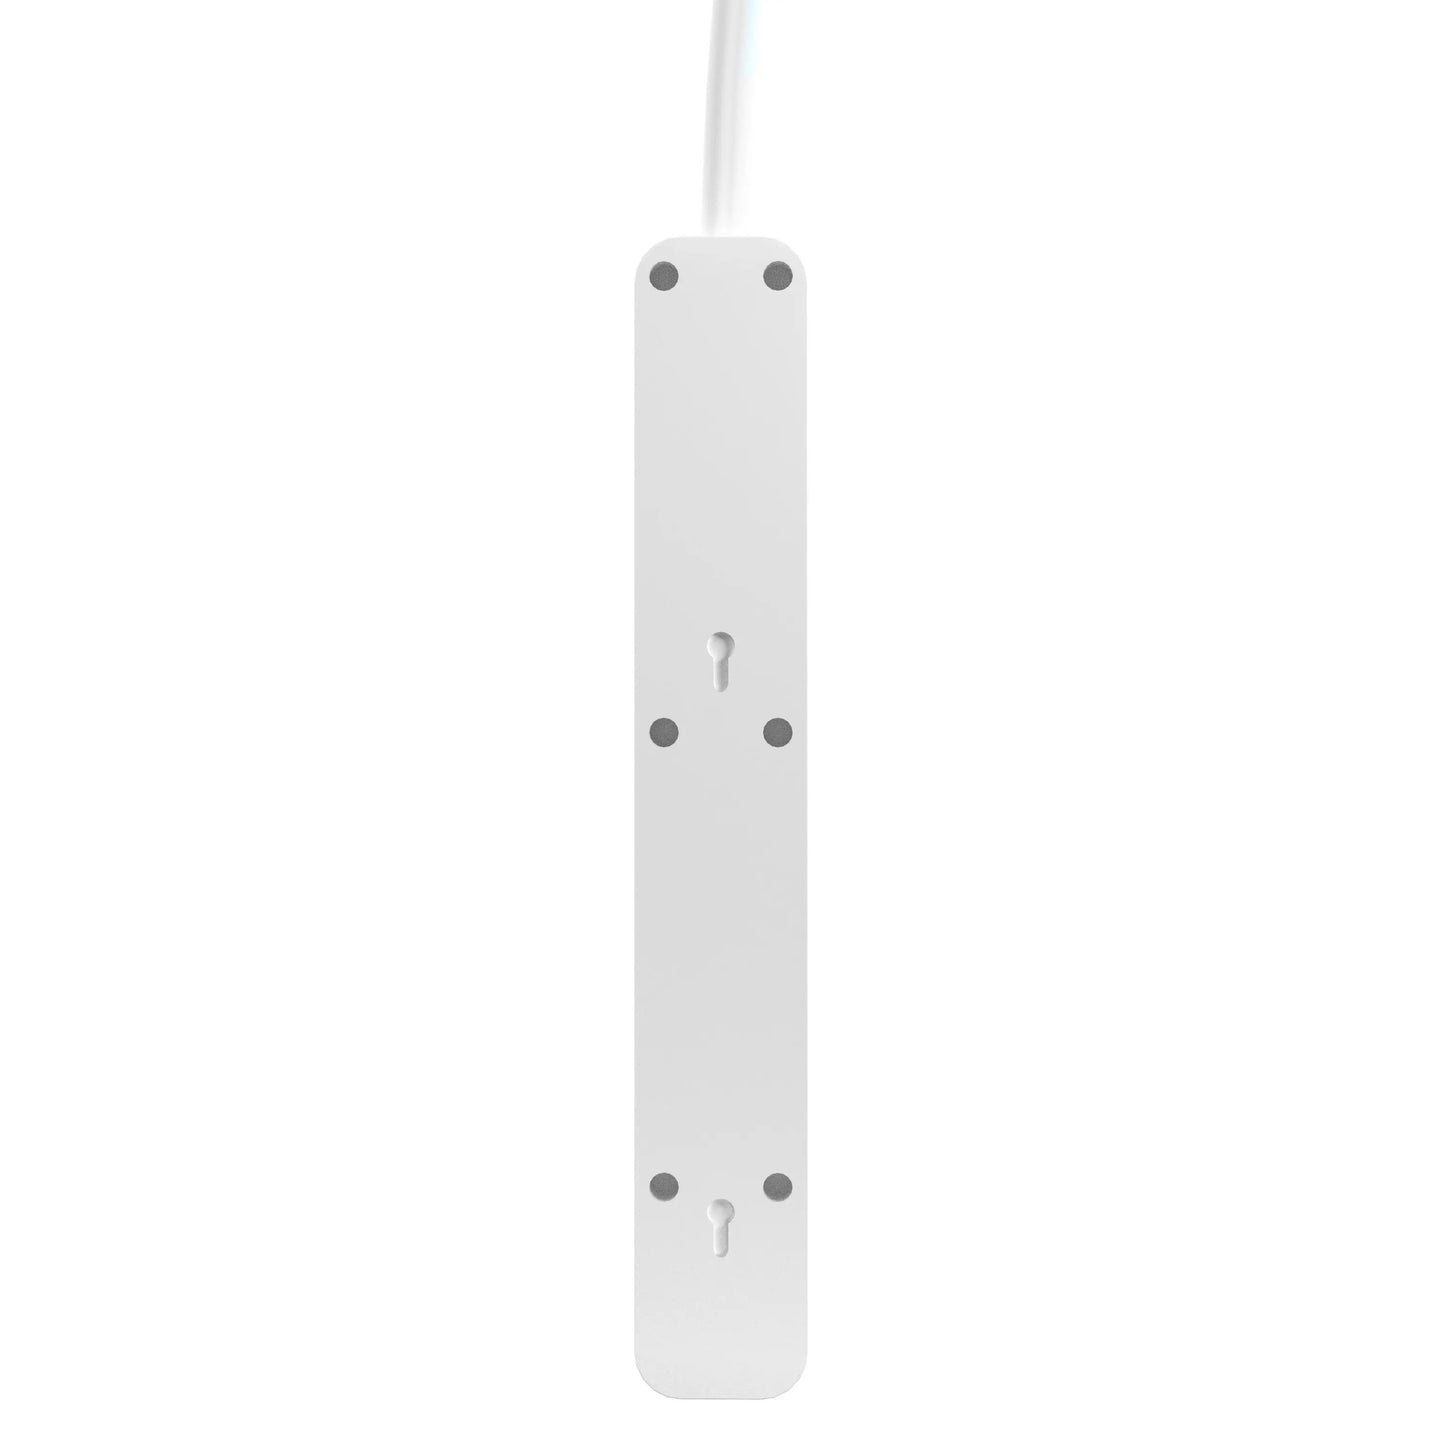 ONE Power 6 Outlet Power Strip with 2 Foot Extension Cord (PS601)